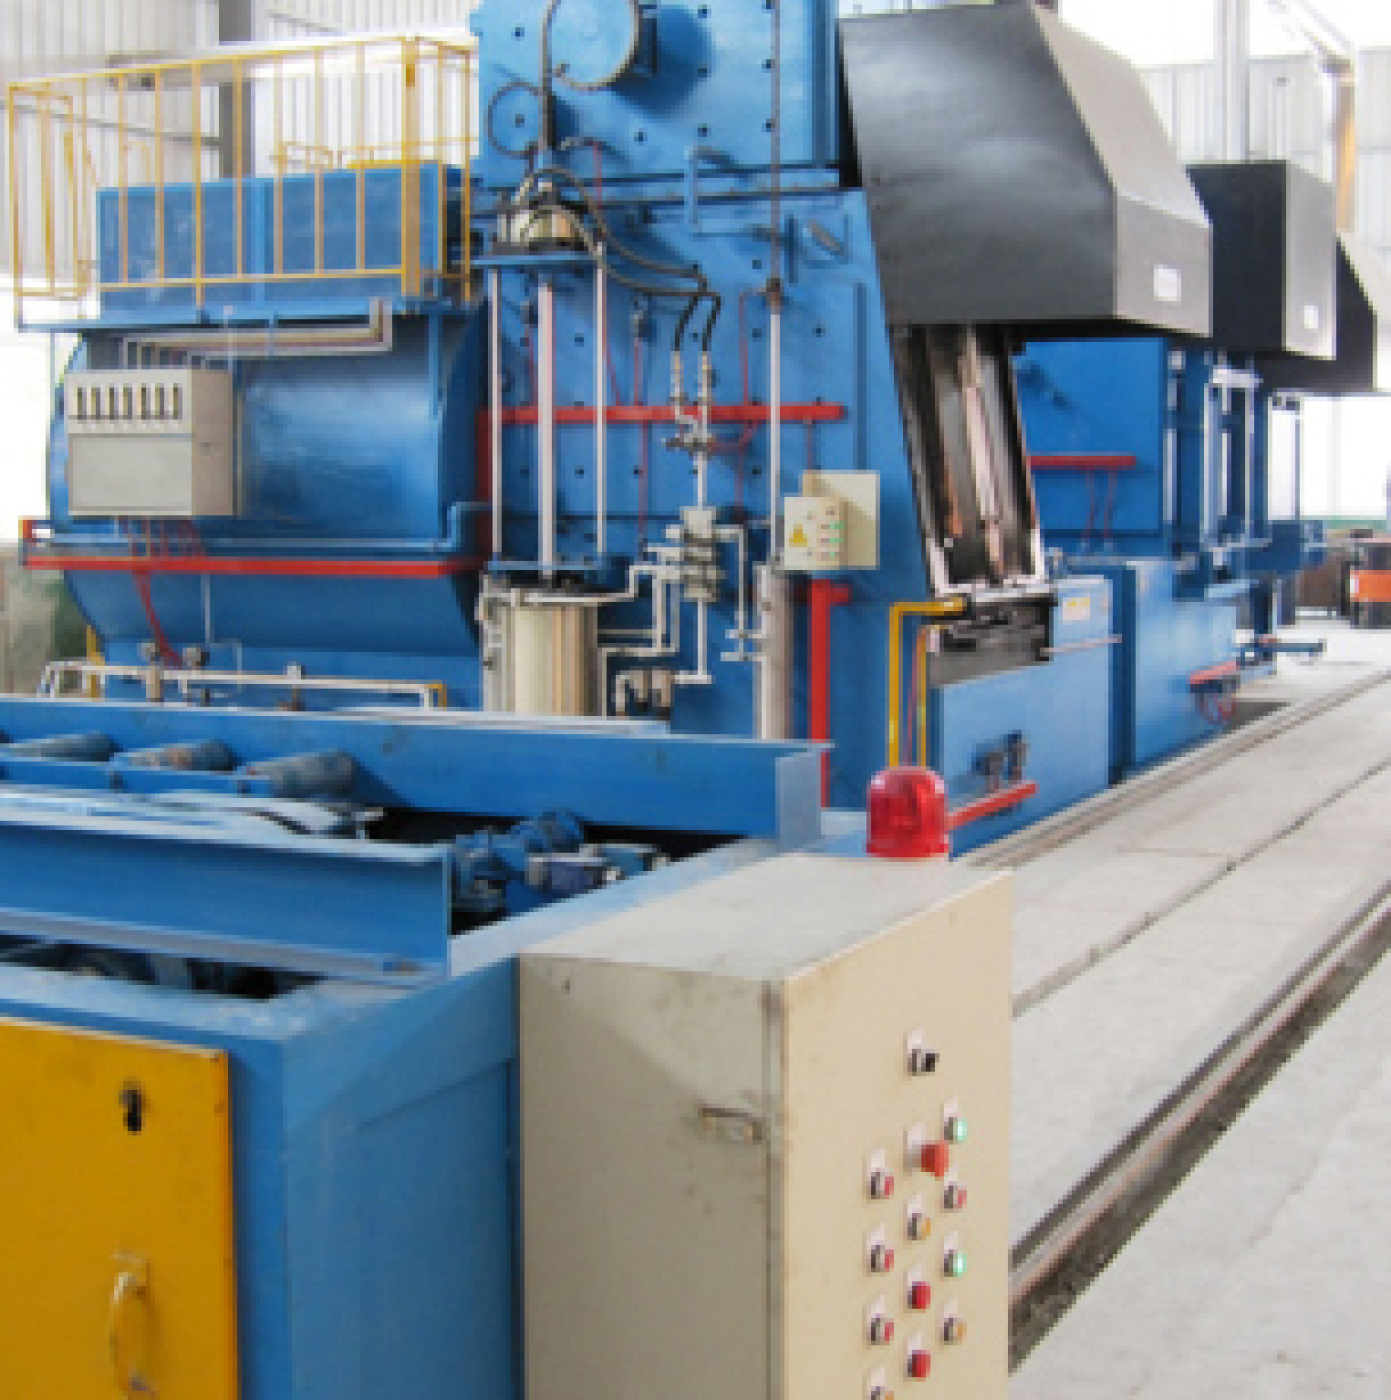 Well type carburizing furnace